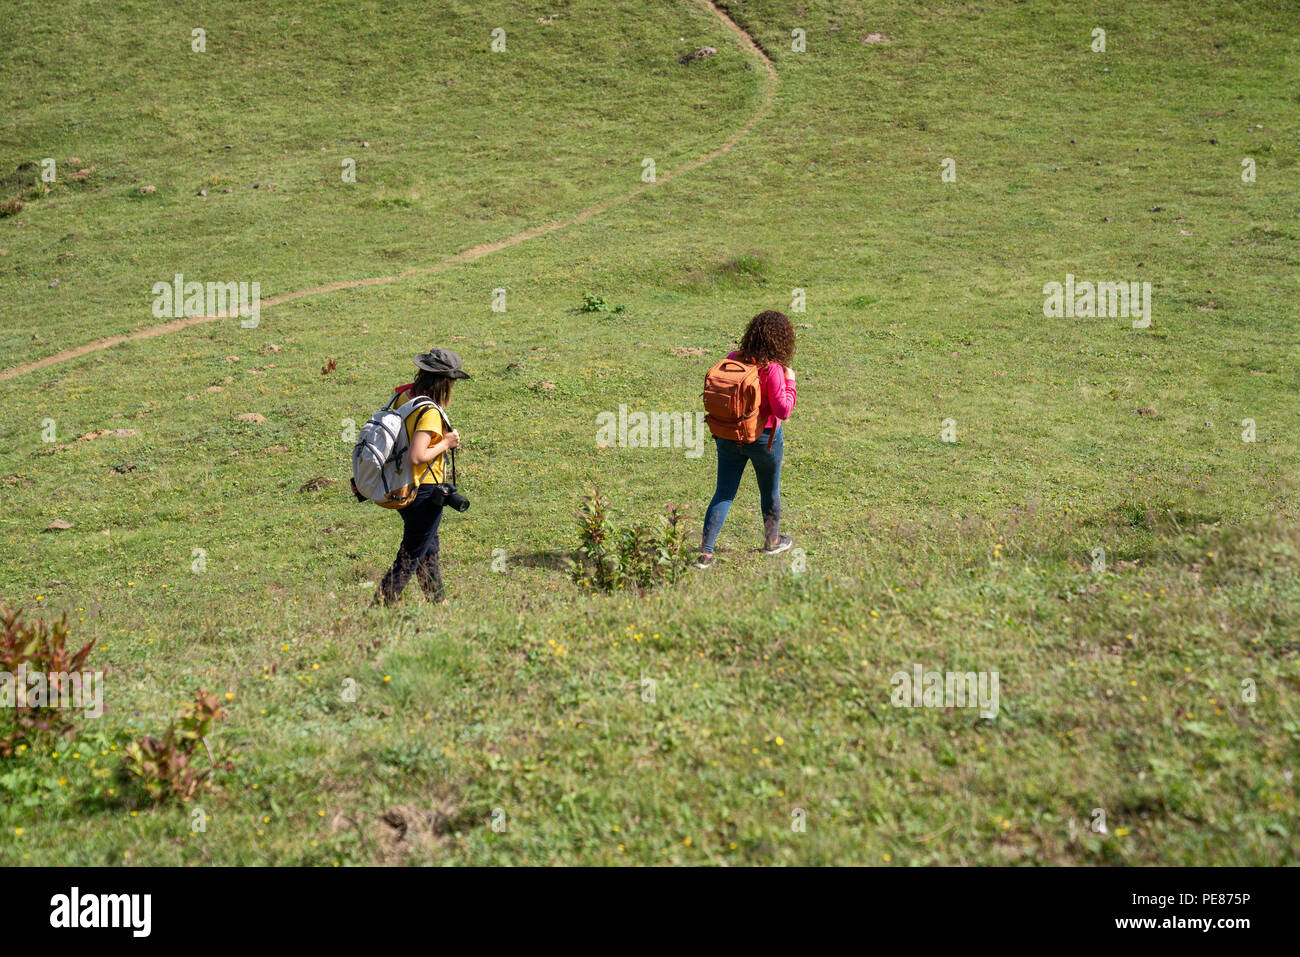 Backpacker Hiking Journey Travel concept with friends Stock Photo